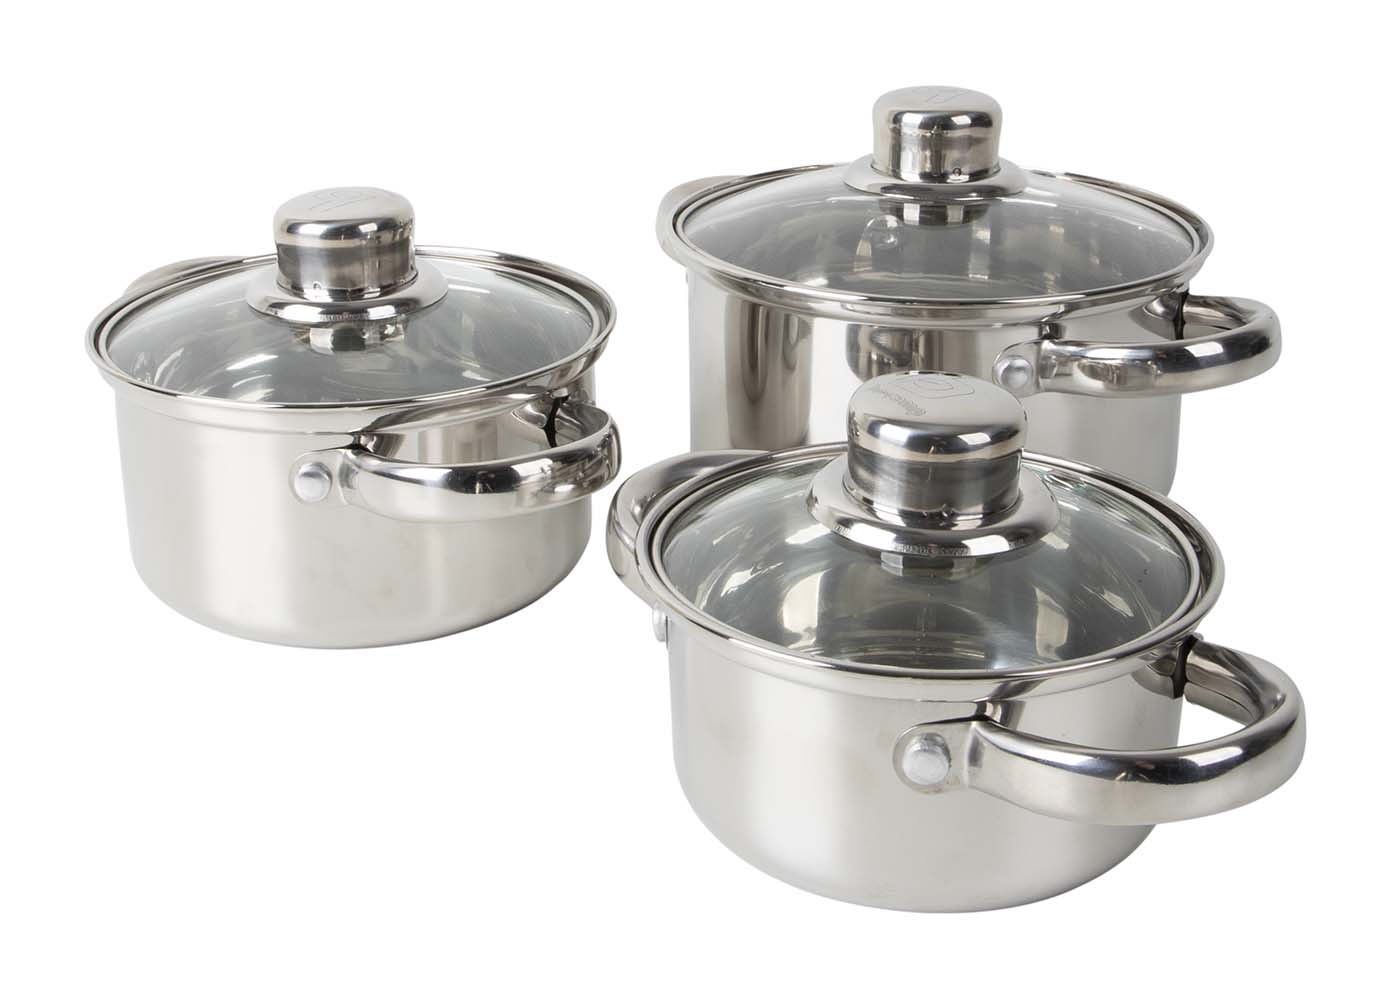 2100937 A 3-piece stainless steel cookware set. Each pan has a sturdy glass lid. These narrow and low pans are ideal for the limited space on gas cookers. To be used on the heat sources gas, ceramic and electric. Dimensions (Øxh): 12x7, 14x8 and 16x9 cm. Contents: 650 ml, 1 liter and 1.6 liters.